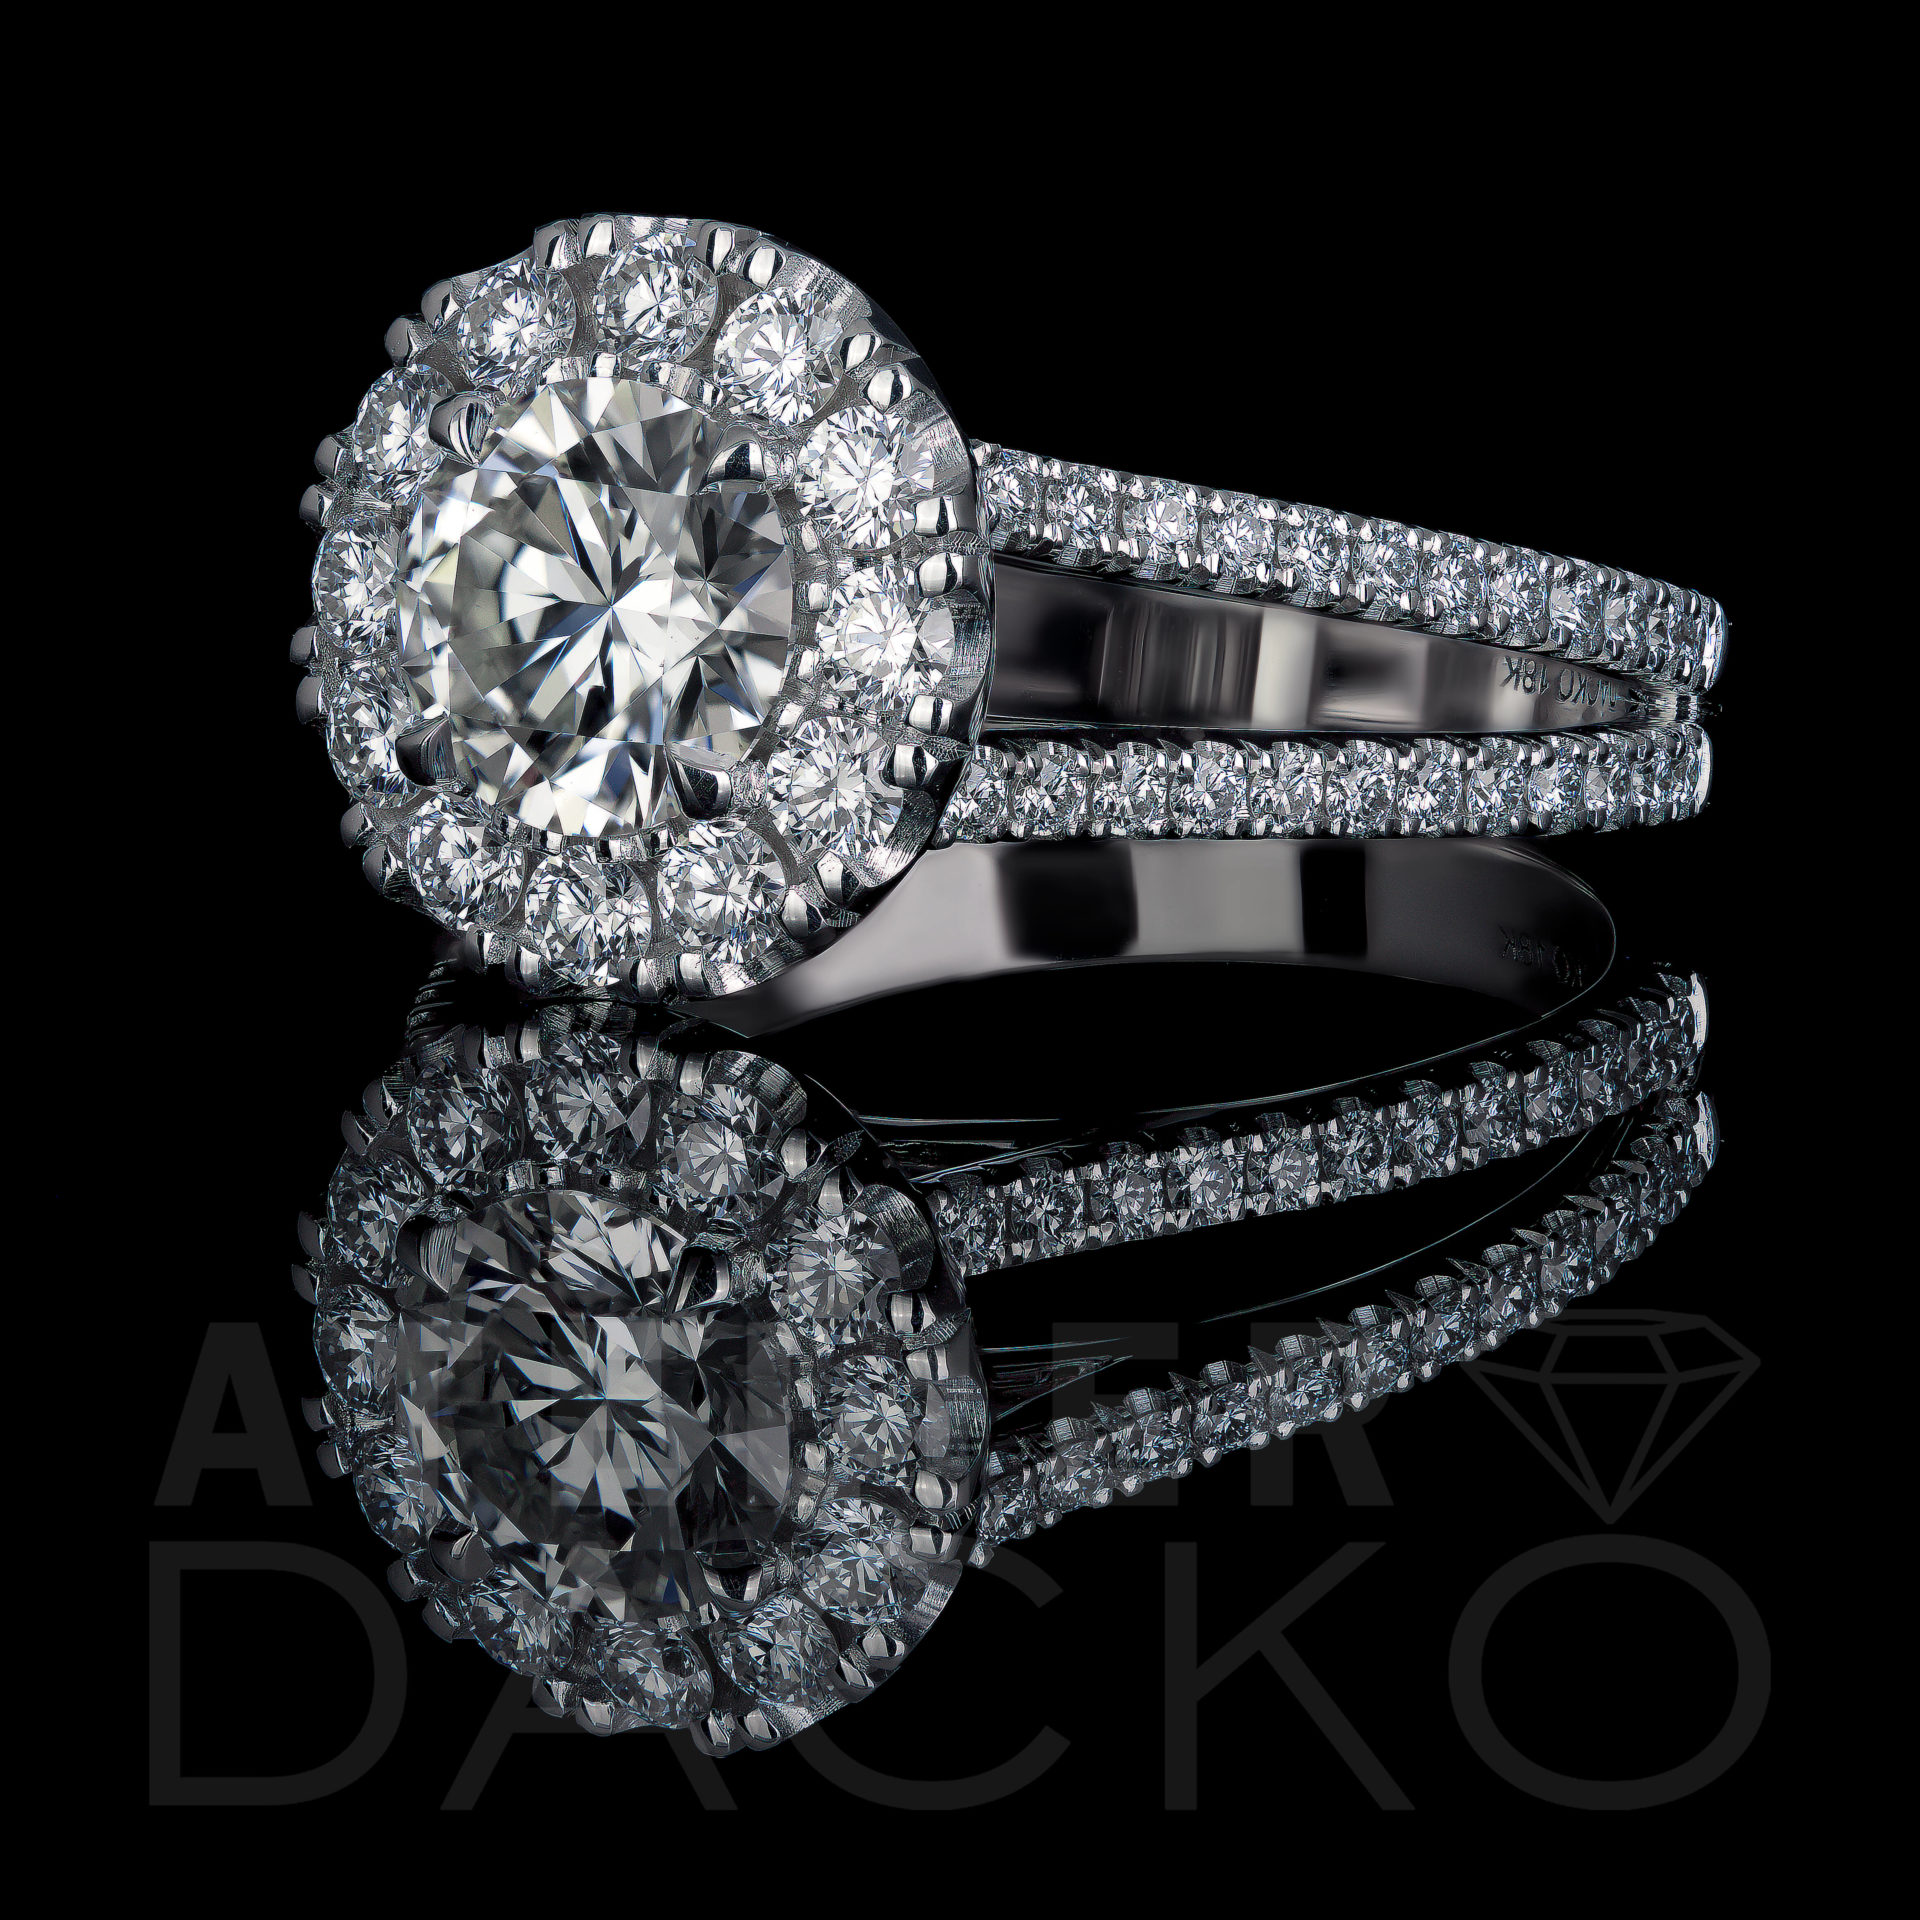 AD009 - 1.25 CT Round Diamond Engagement Ring with Oversized Halo - 2